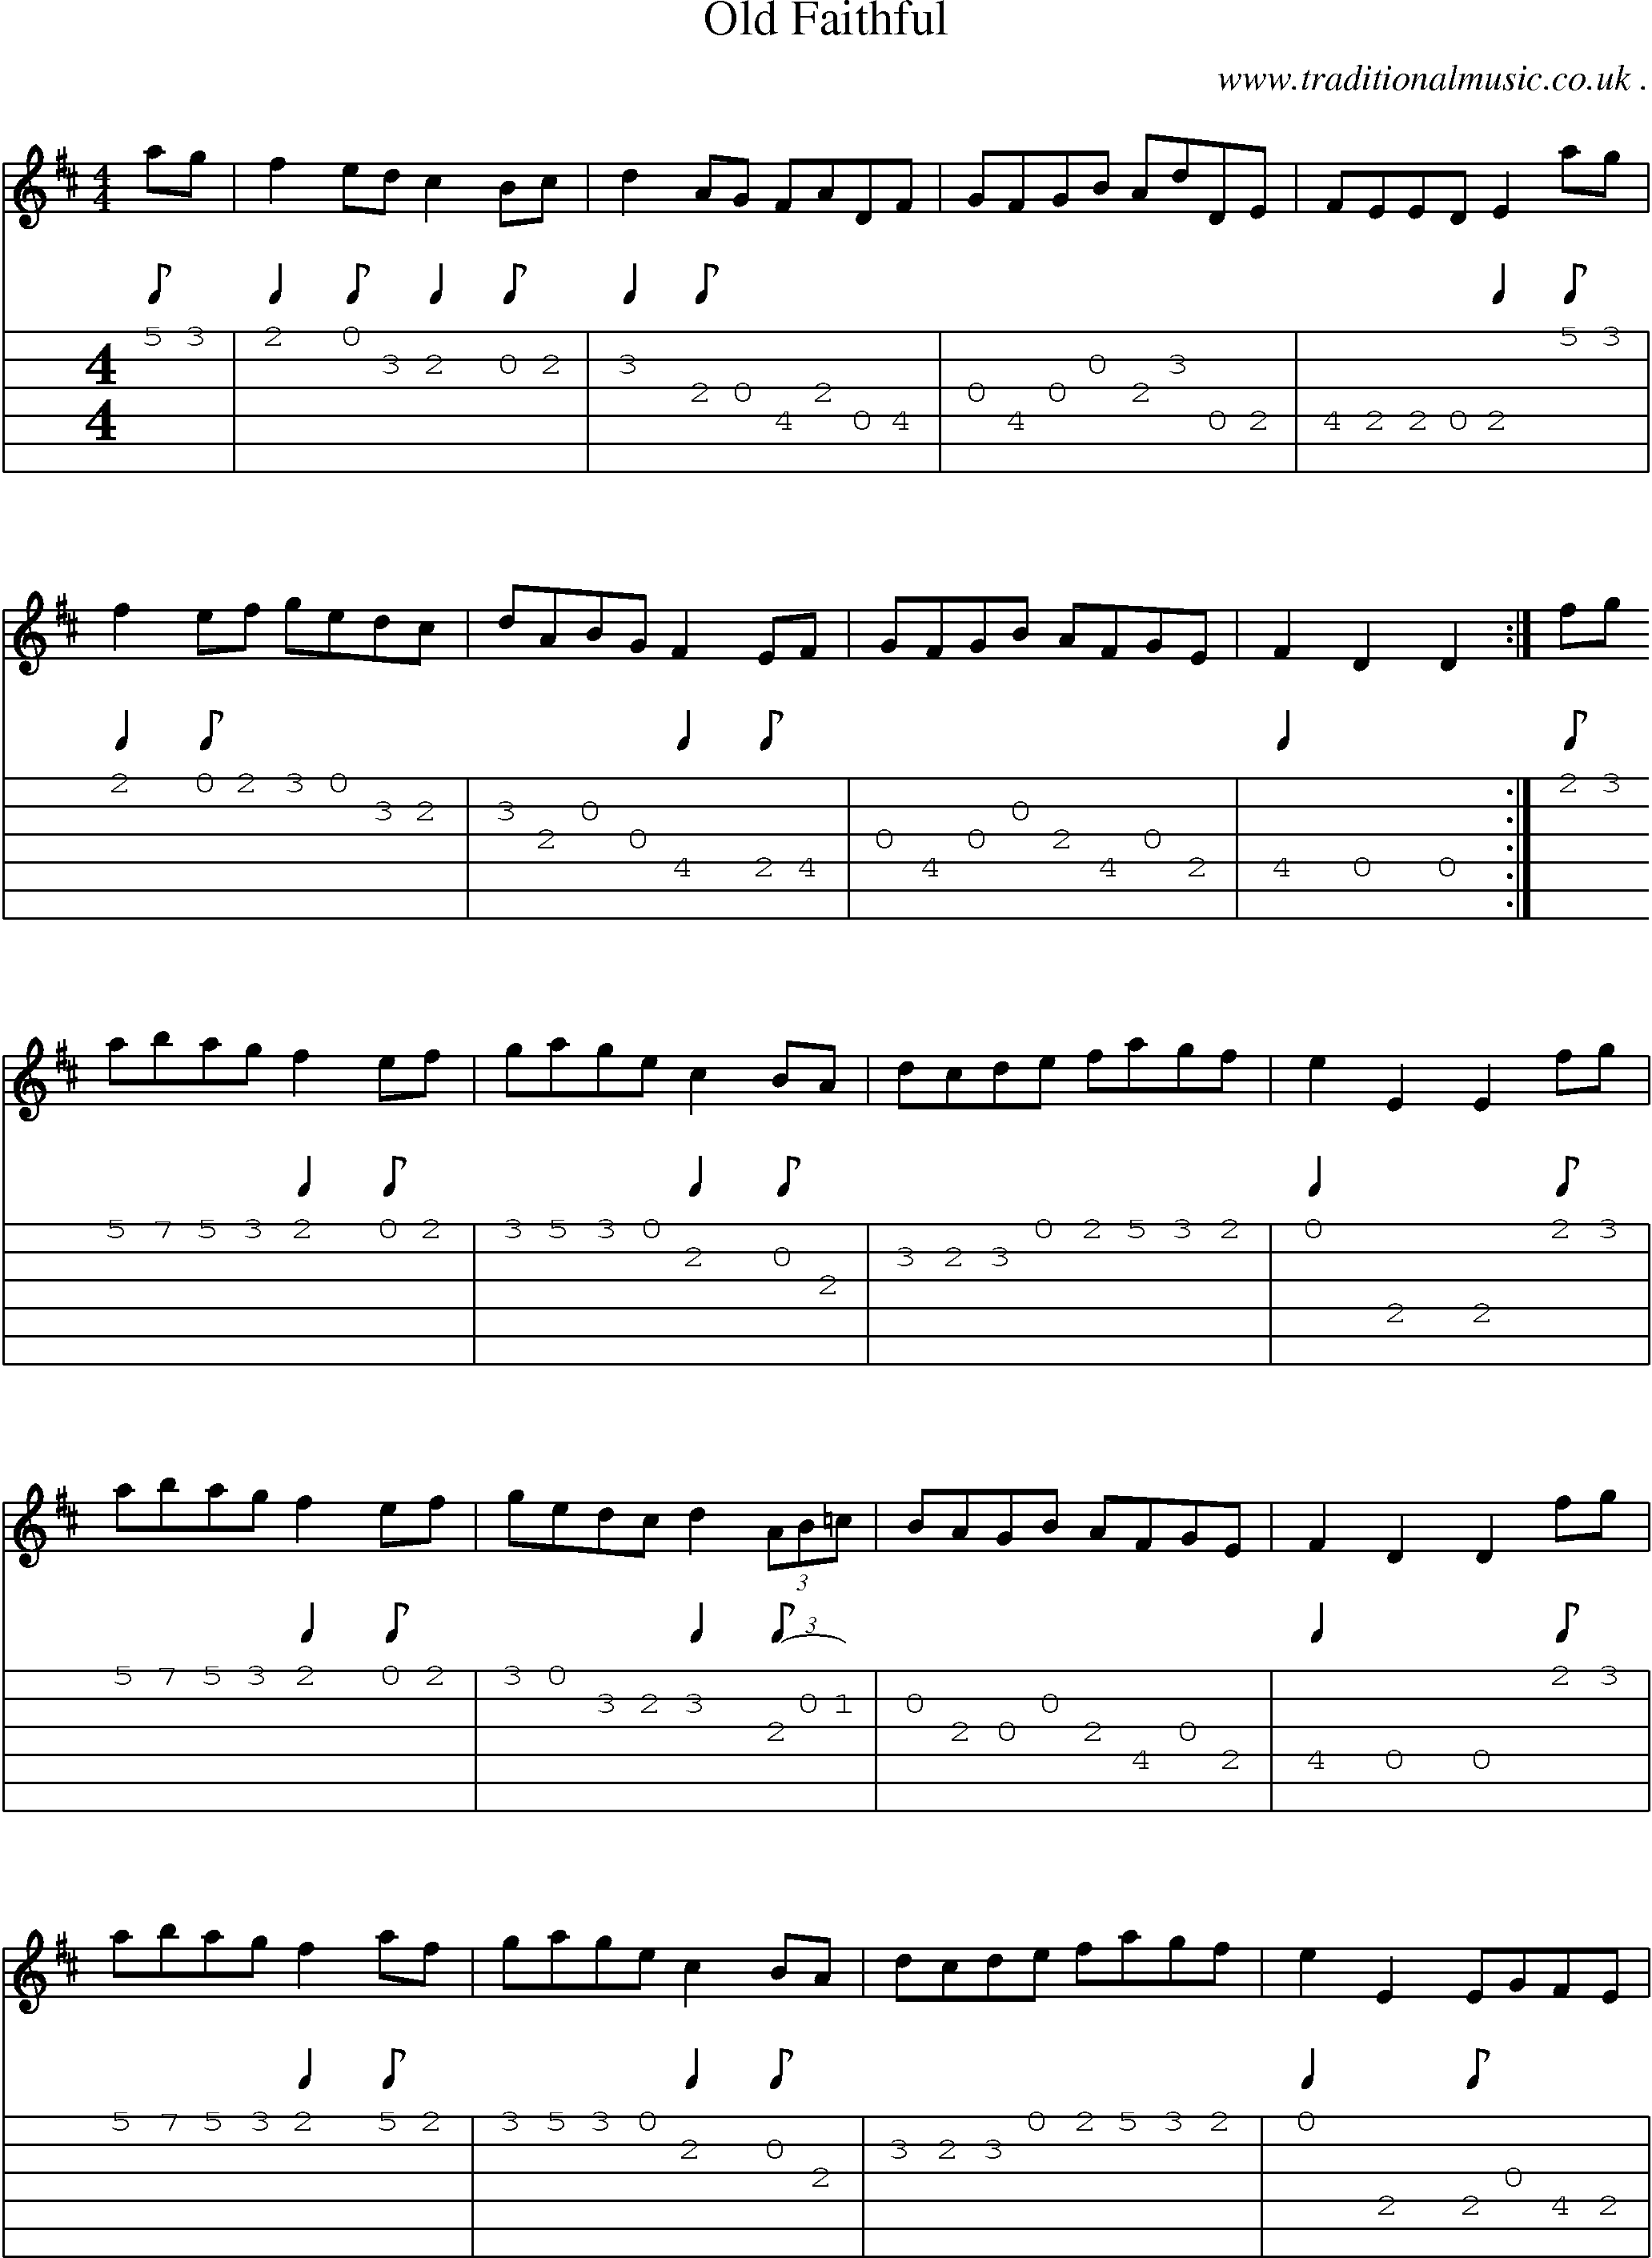 Sheet-music  score, Chords and Guitar Tabs for Old Faithful